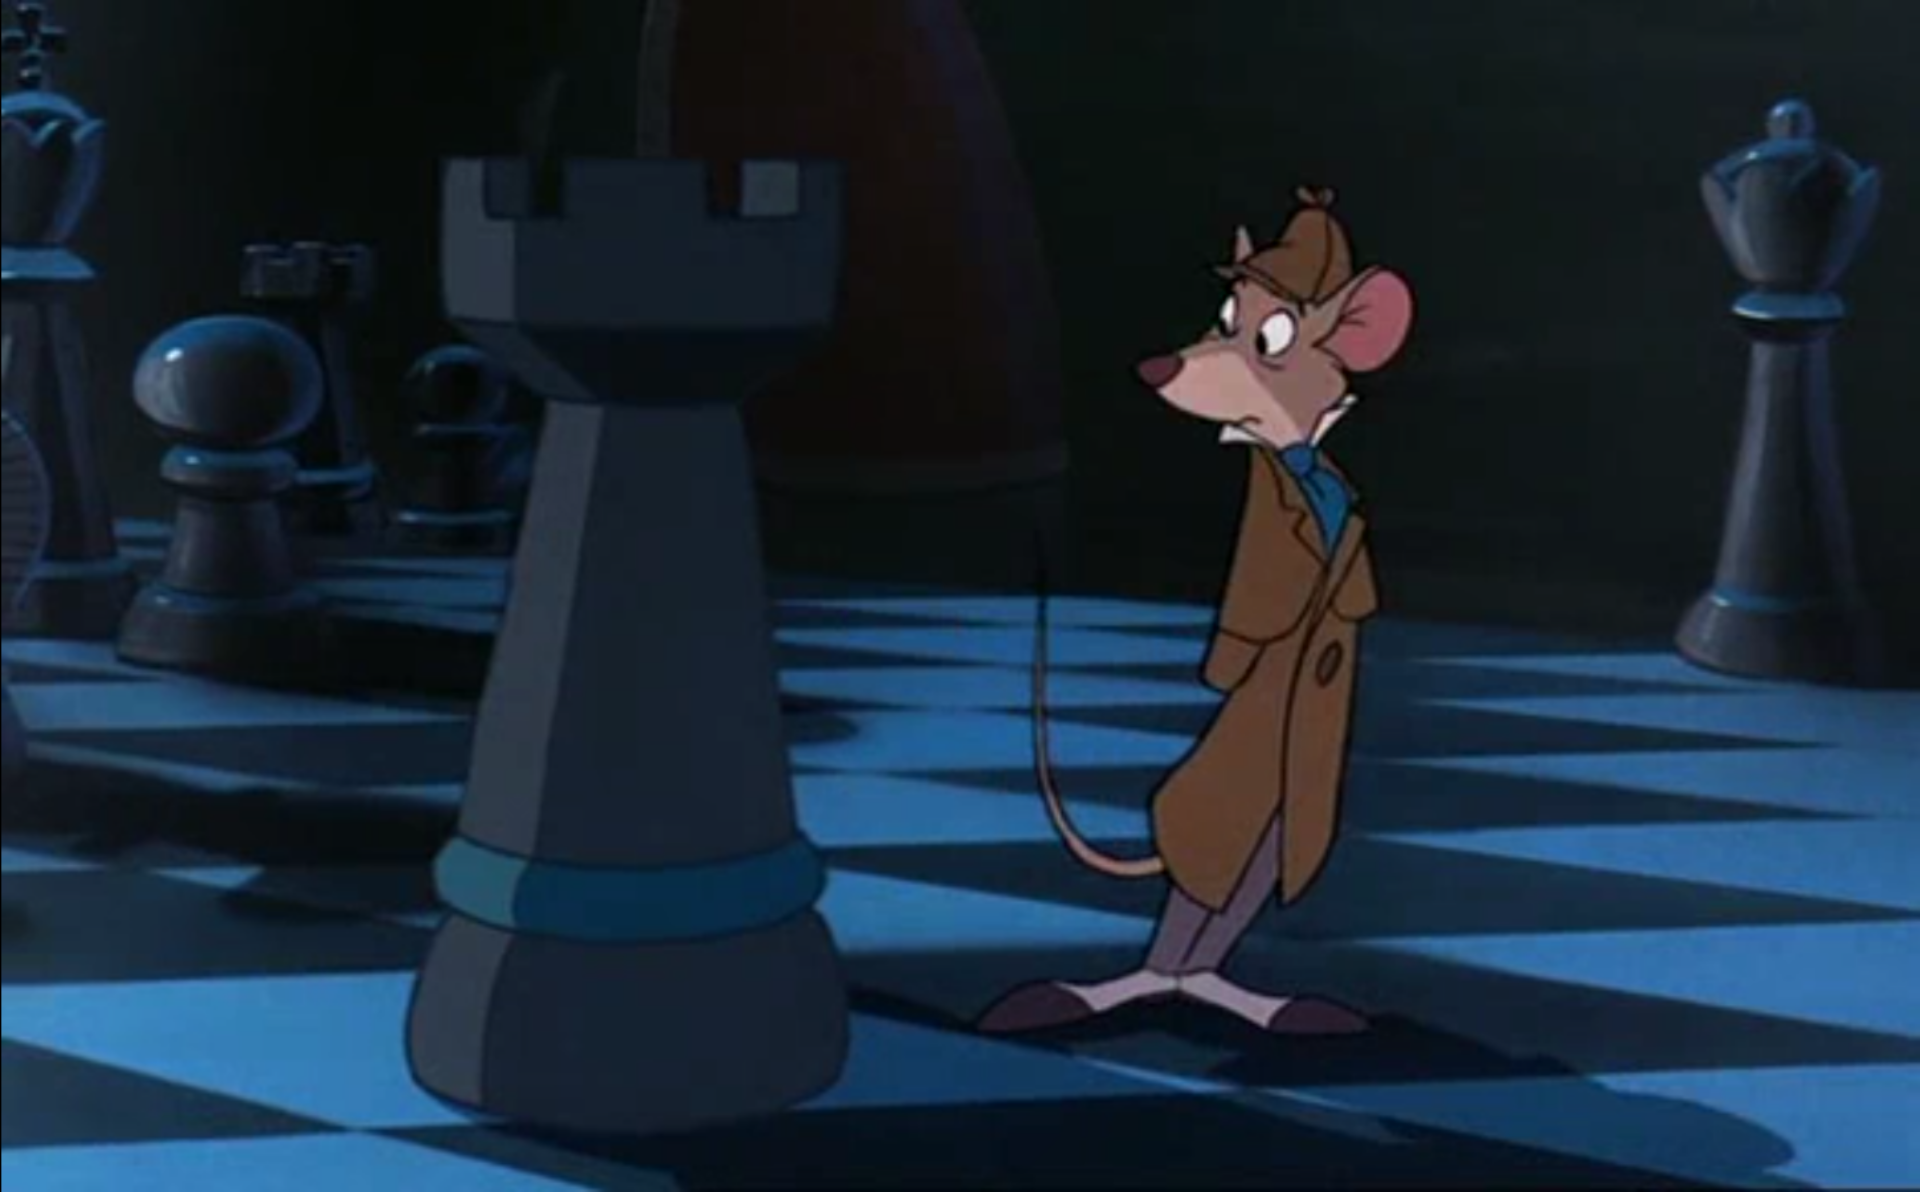 Basil the great mouse detective